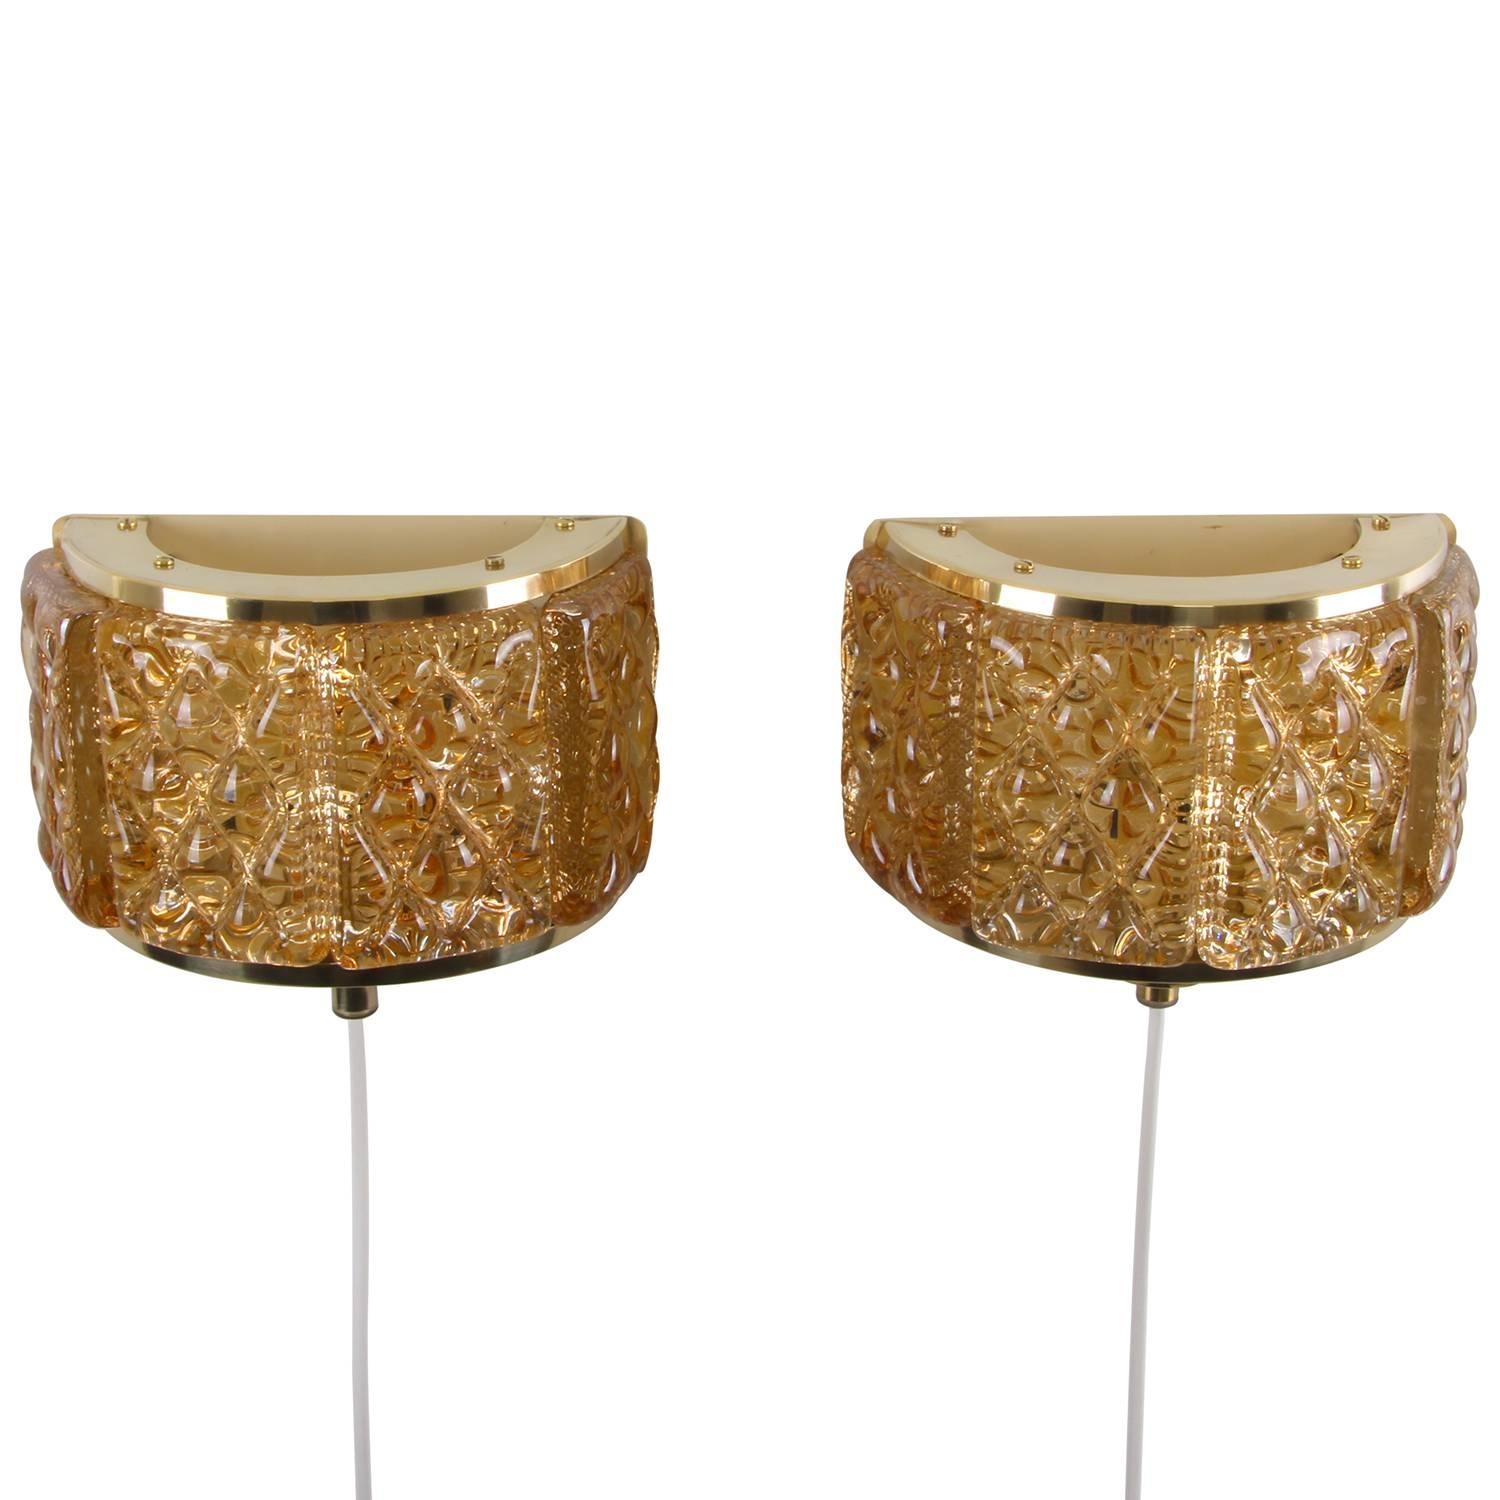 20th Century Gallalampet, Pair of Sconces by Vitrika, 1970s, Brass & Golden Glass Wall Lamps For Sale